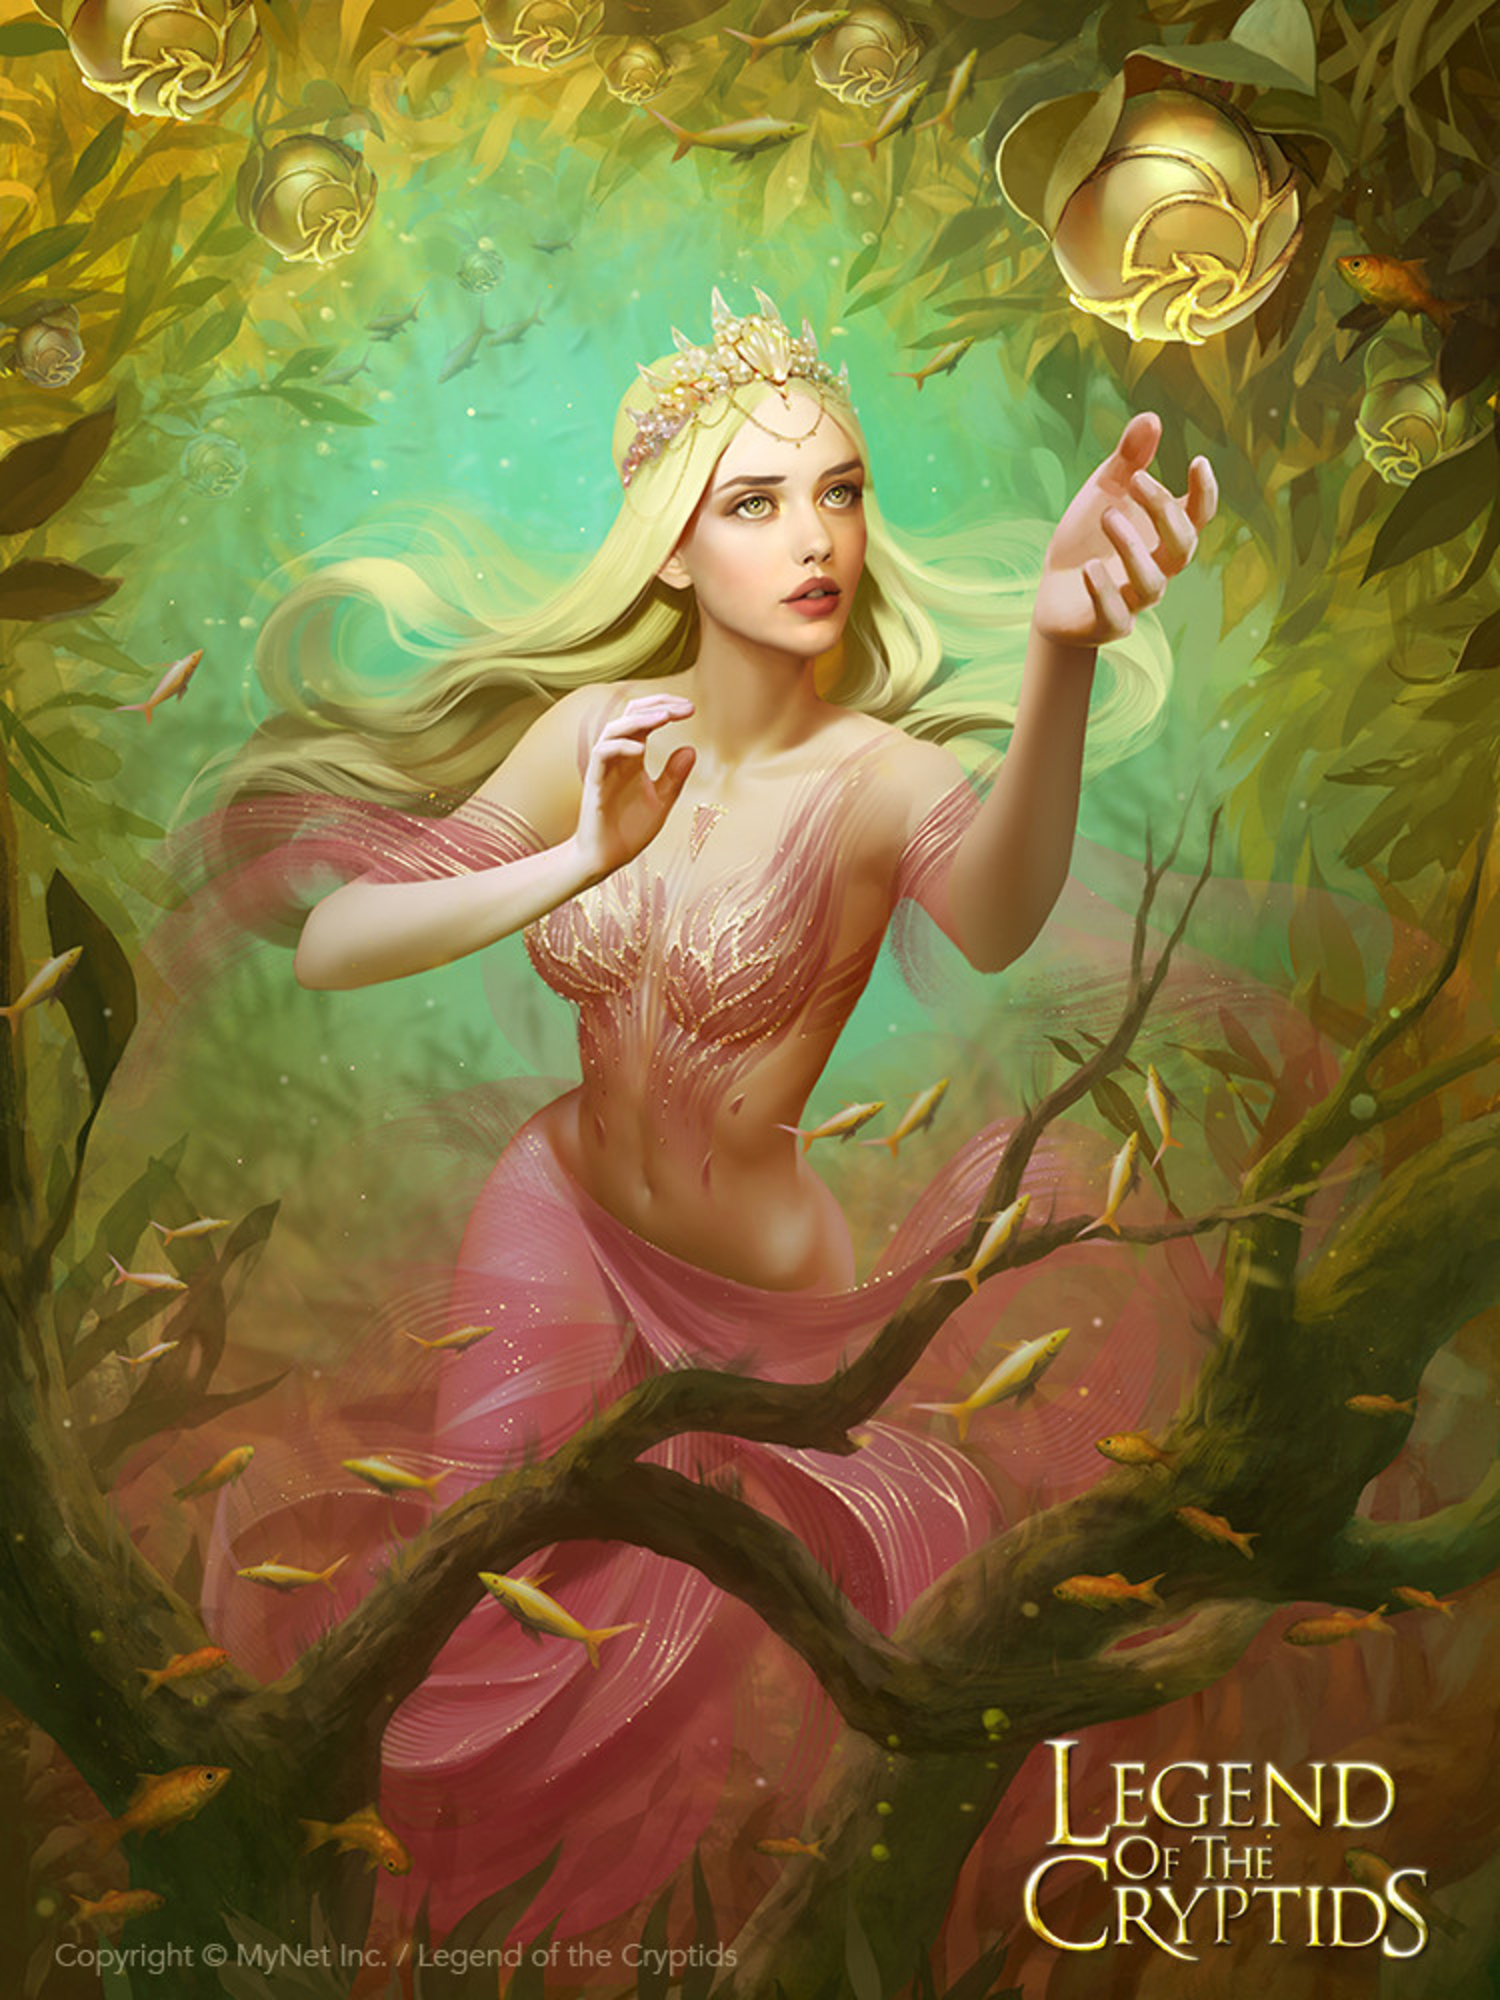 General 1500x2000 Legend of the Cryptids fantasy girl blonde long hair